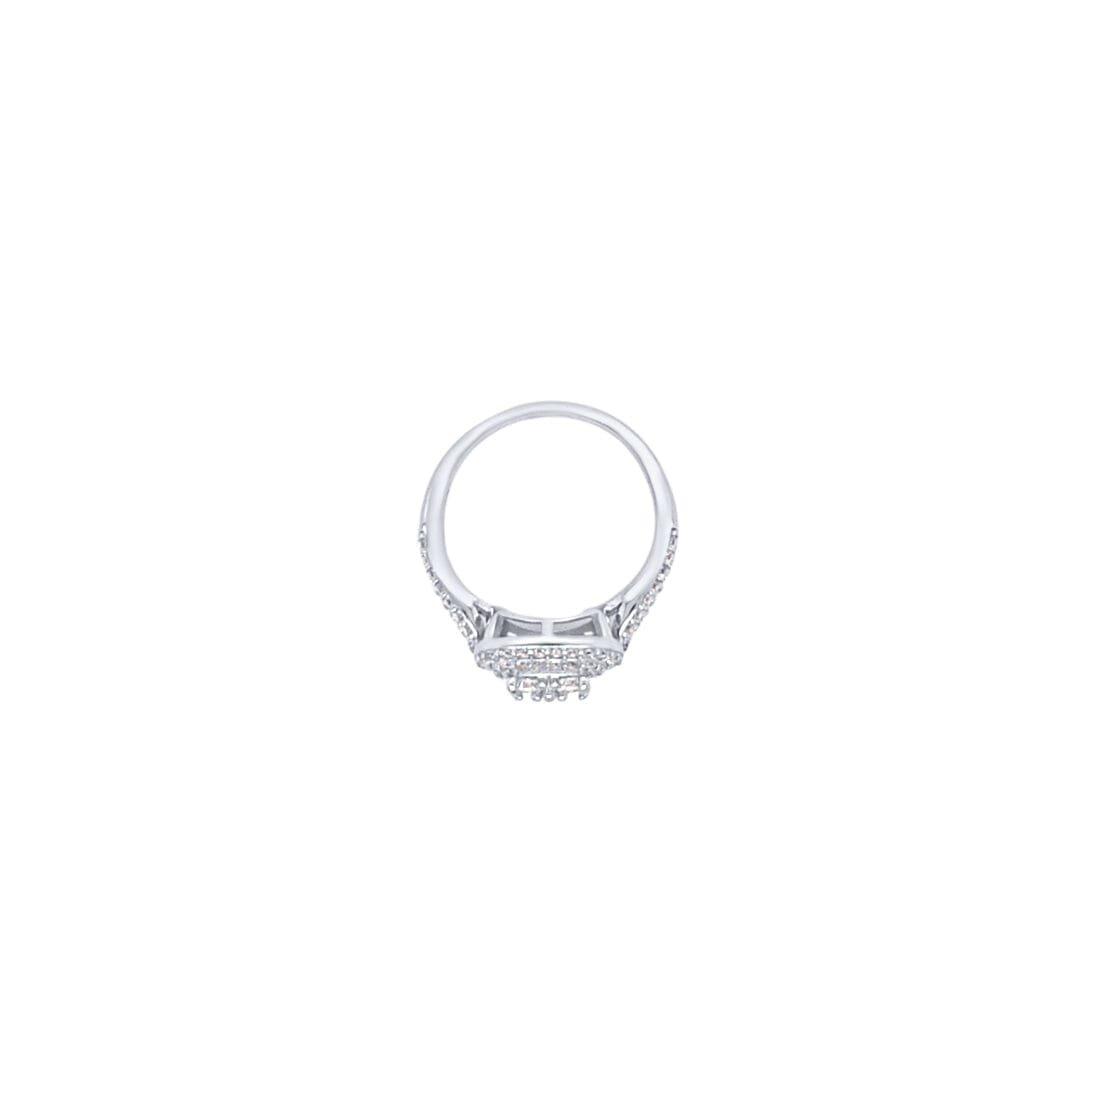 Square Shaped Cluster Ring with Cubic Zirconia in Sterling Silver Rings Bevilles 